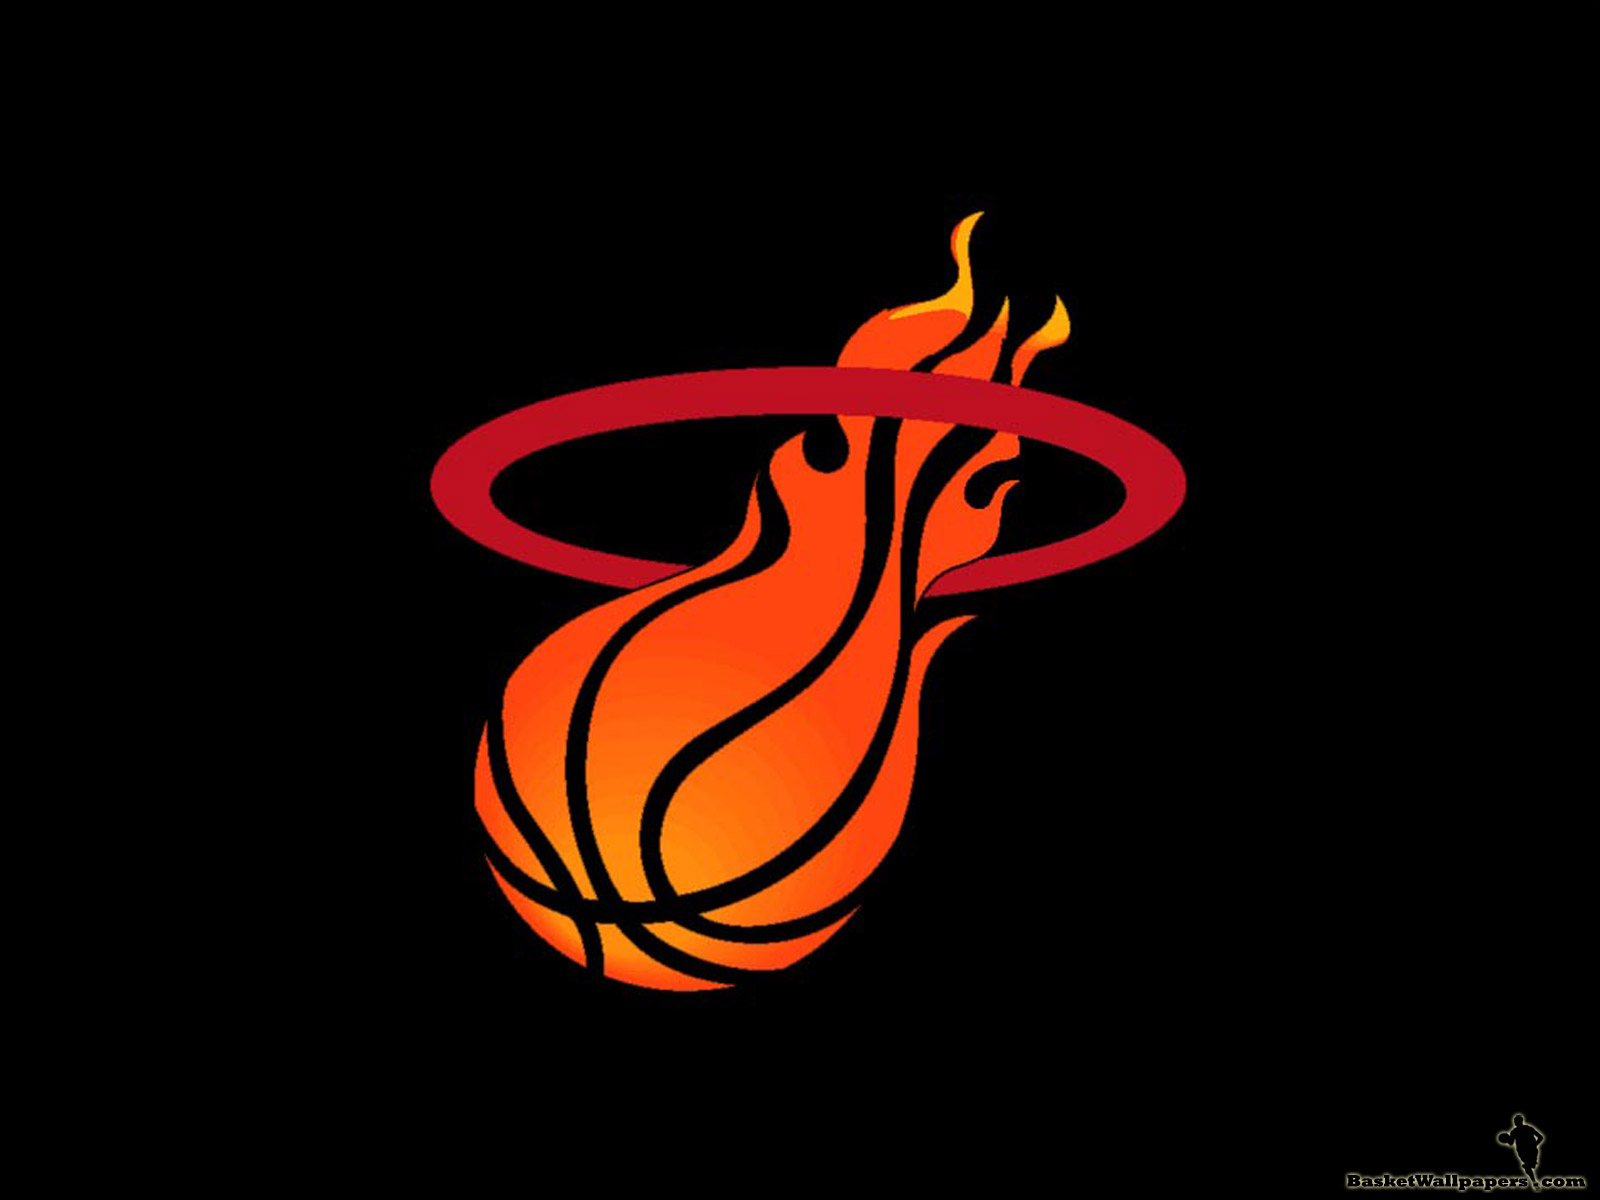 The Second One Is Wallpaper Of Nba Team Miami Heat We Have